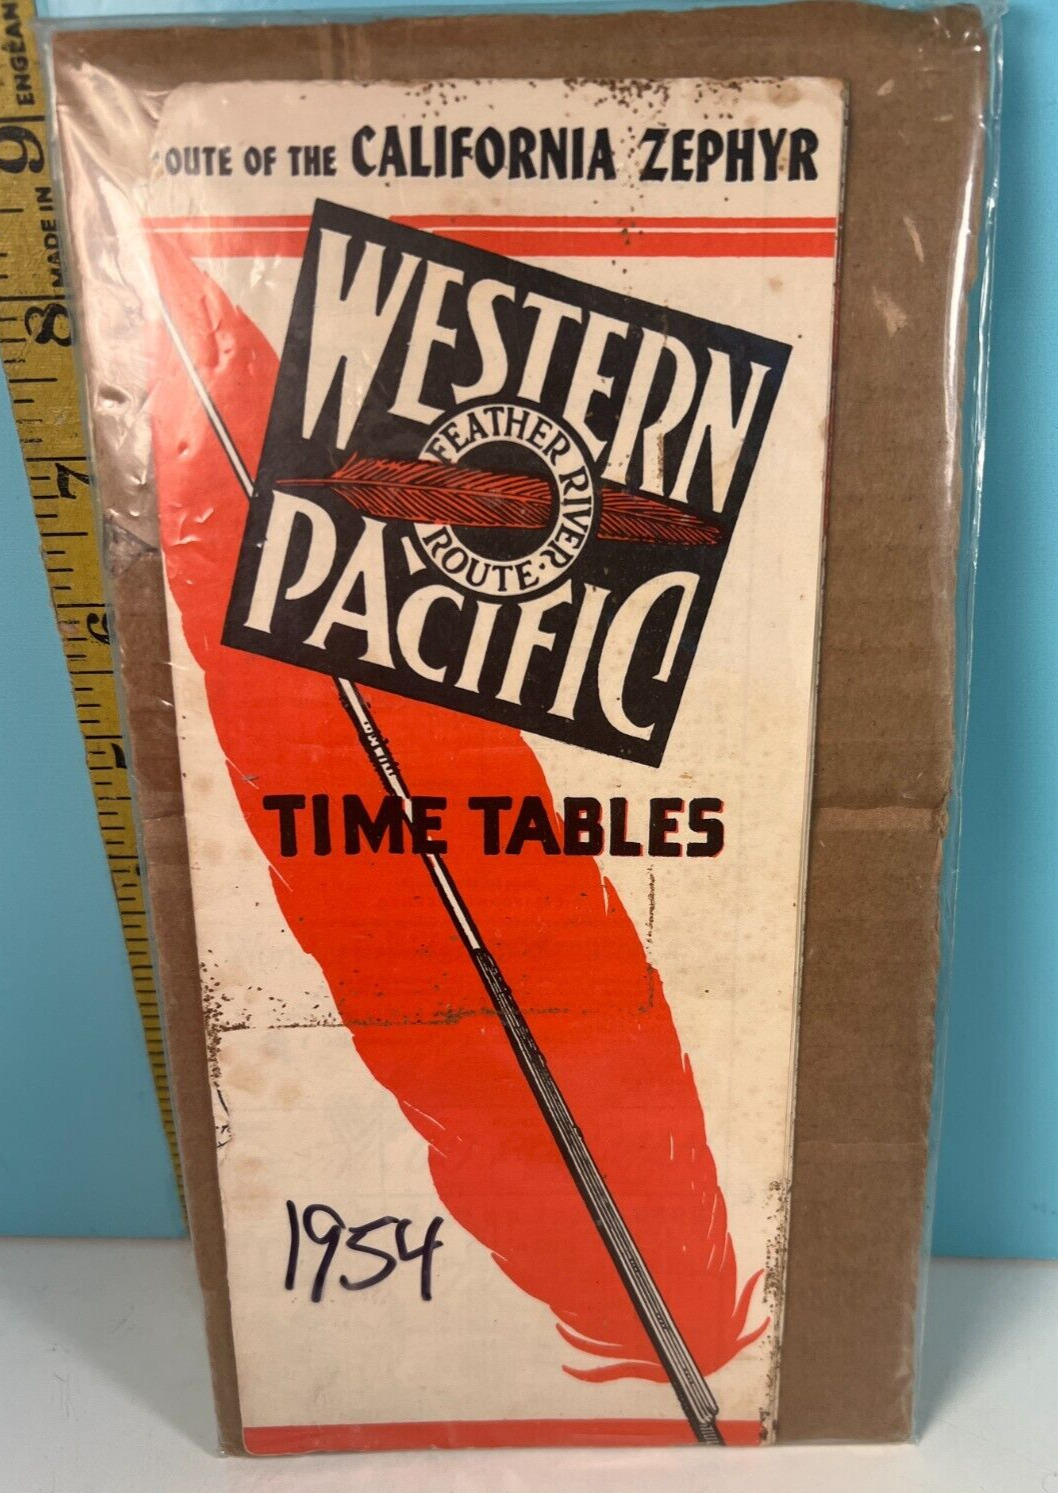 1954 Western Pacific Time Tables